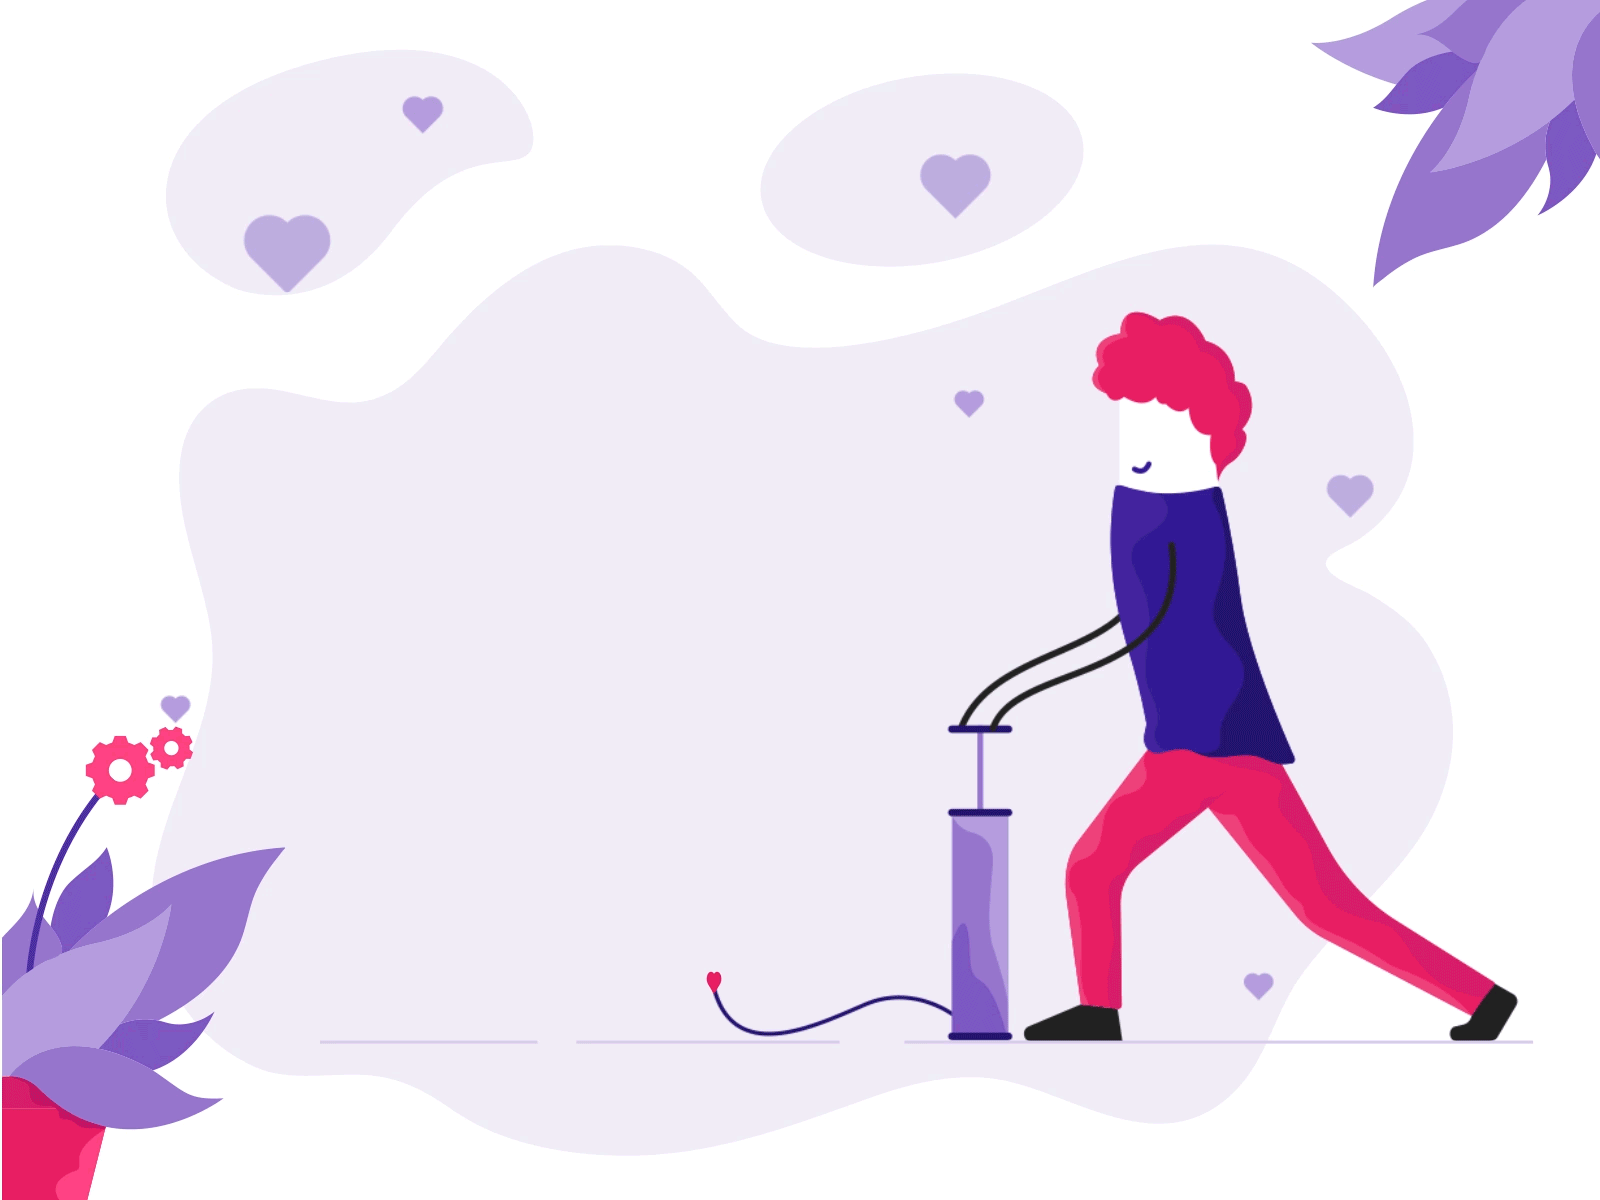 Love is in the air after effects aftereffects animated animated gif animatedgif animation animation after effects clean floating hearts illustration pink purple valentines valentines day valentinesday